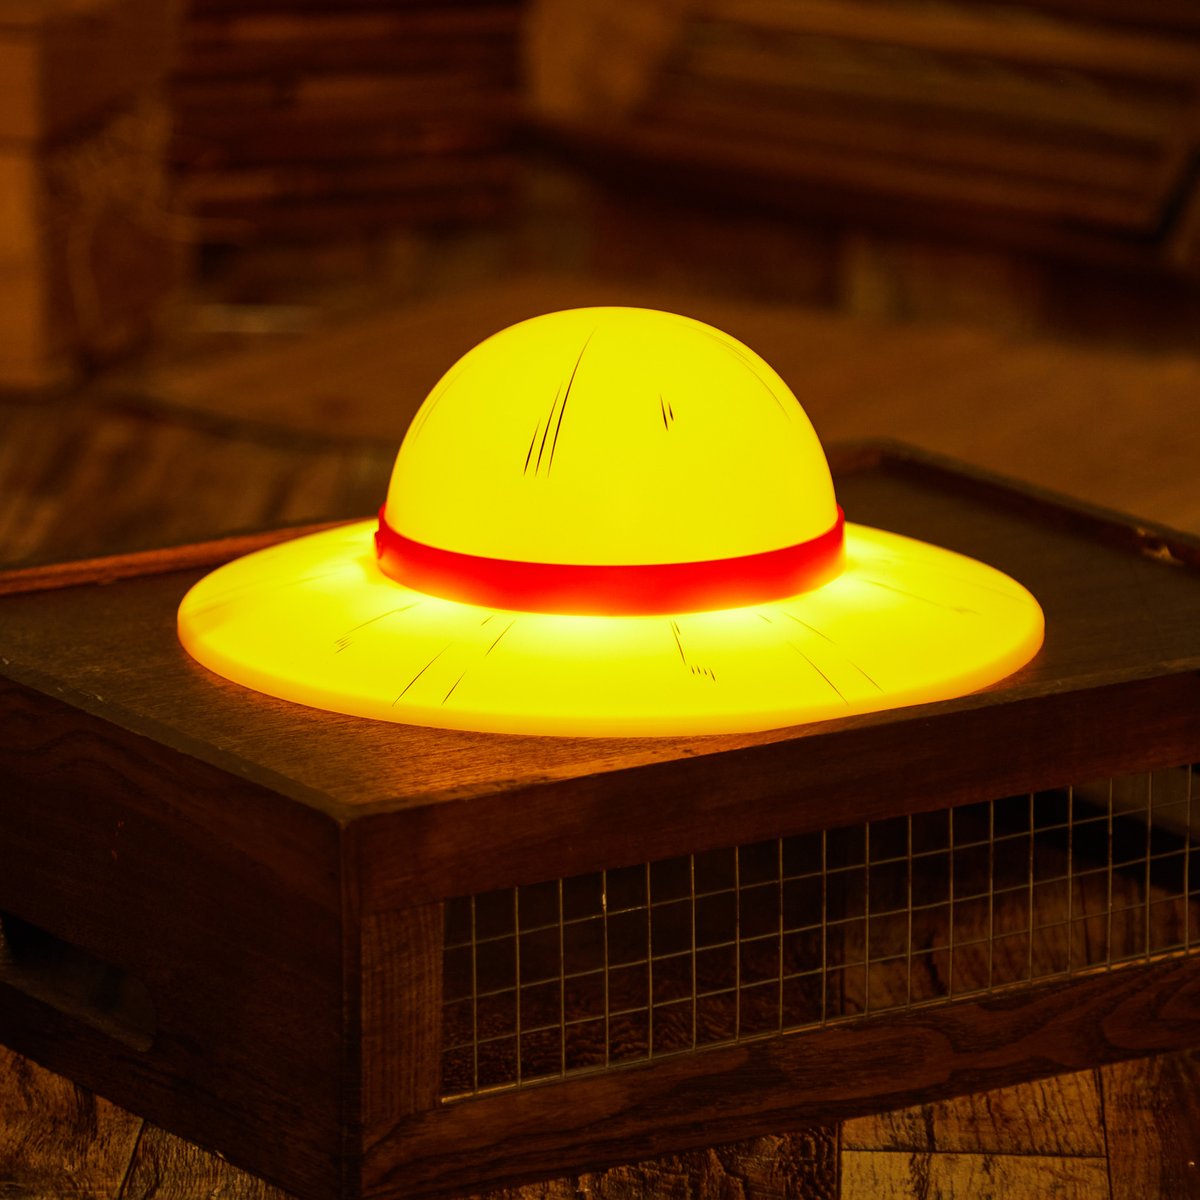 Bring back a memento from your voyages with this #OnePiece mood light! 🏴‍☠️ boxlun.ch/4bqRpin